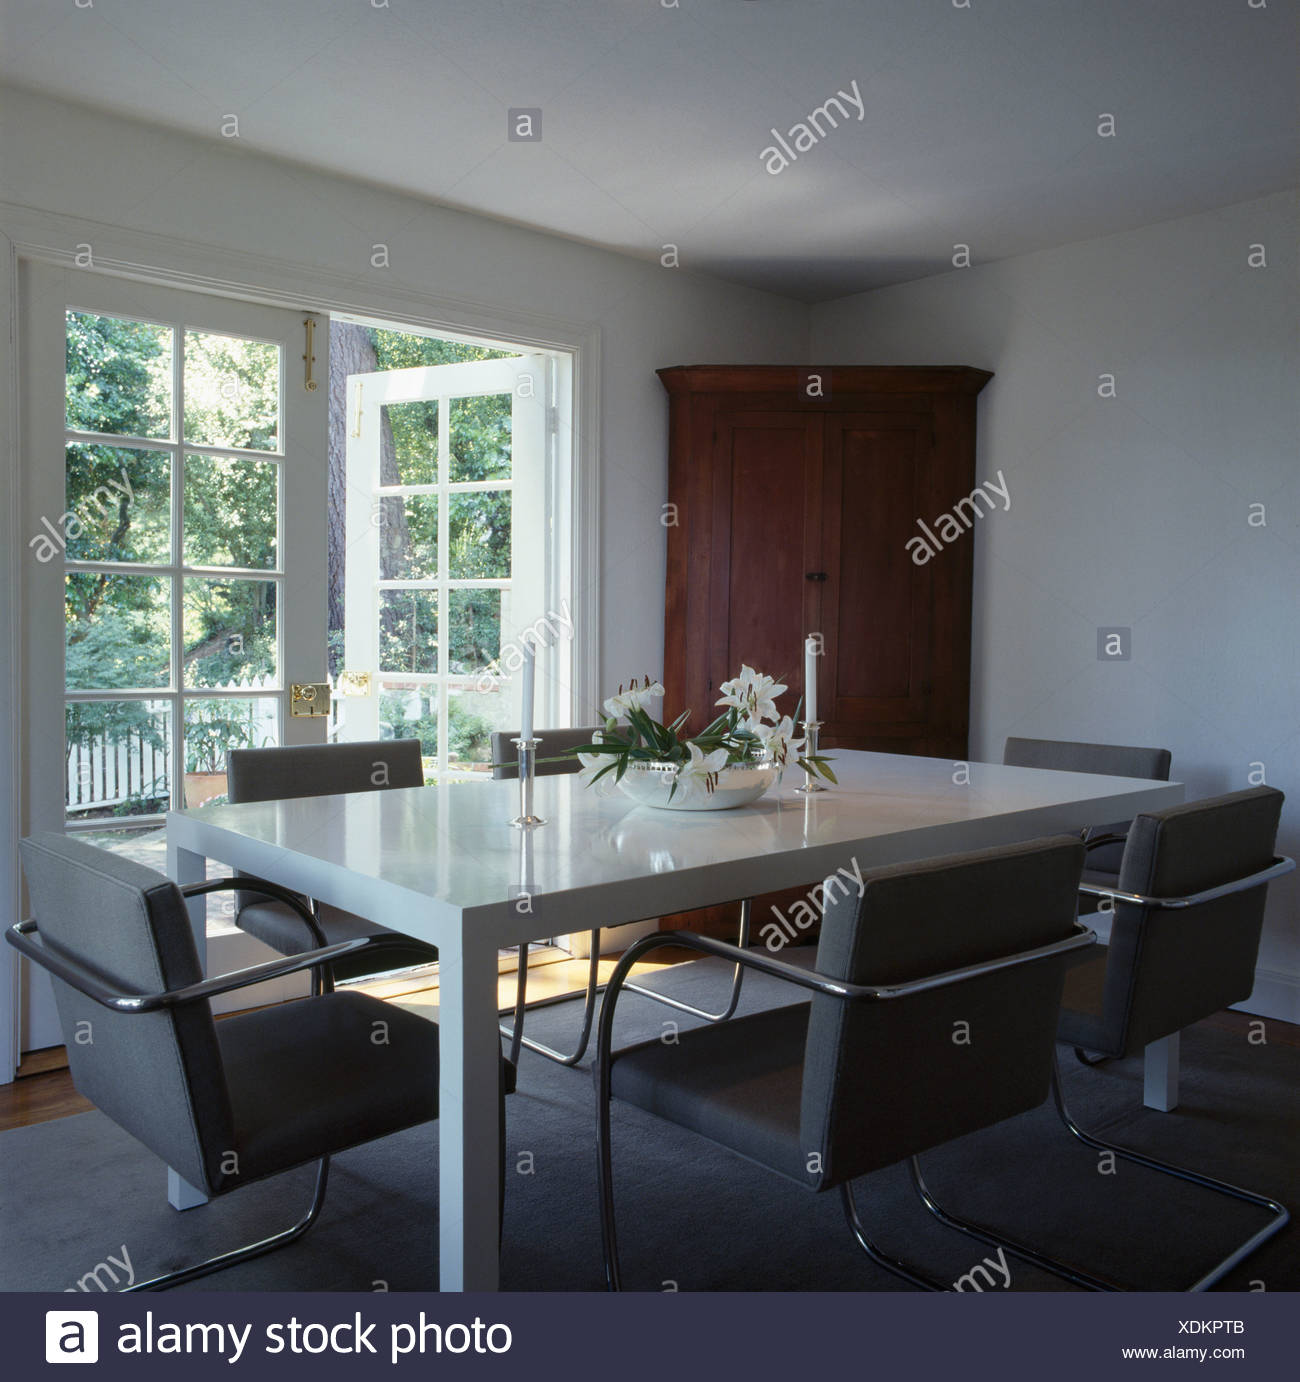 Grey Upholstered Chairs And White Table In Modern White Dining Room With French Windows Stock Photo Alamy